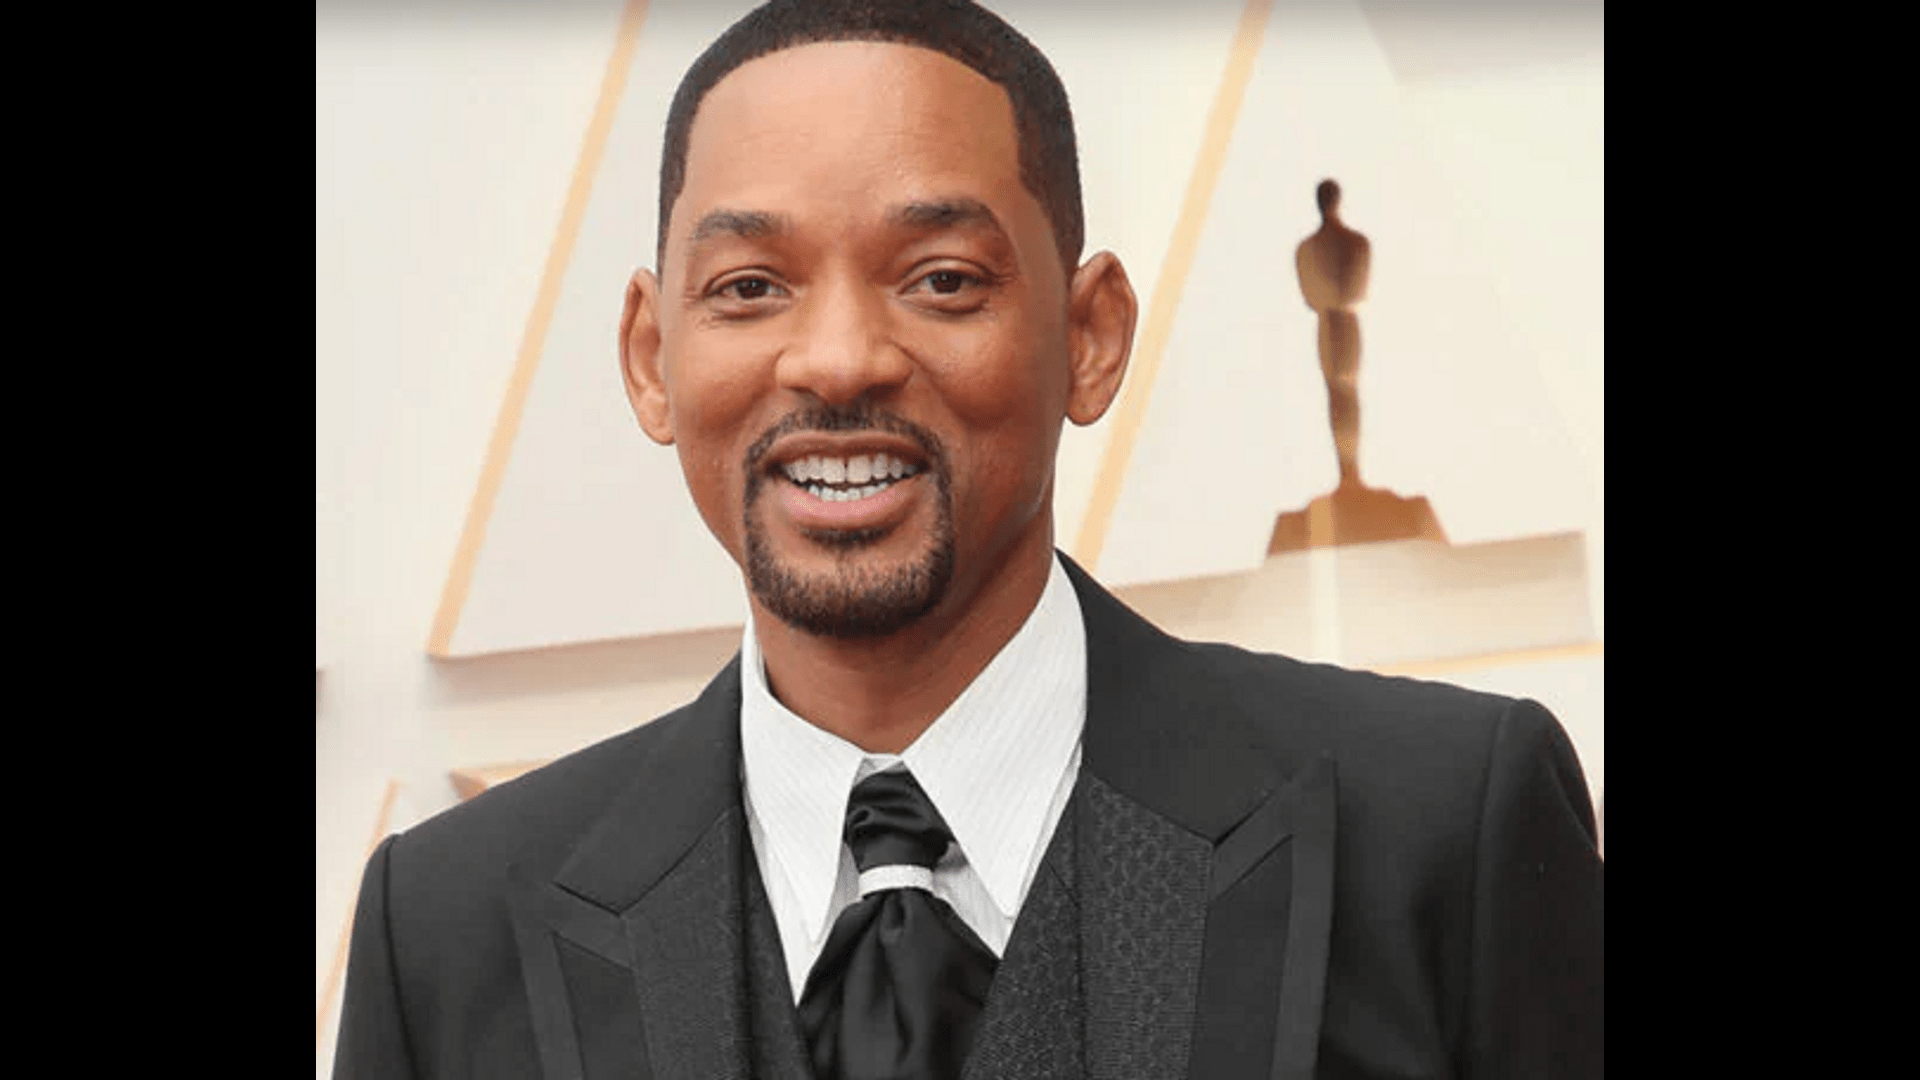 ”the-baftas-are-not-like-the-oscars-will-smith-would-have-been-expelled-at-the-british-awards”